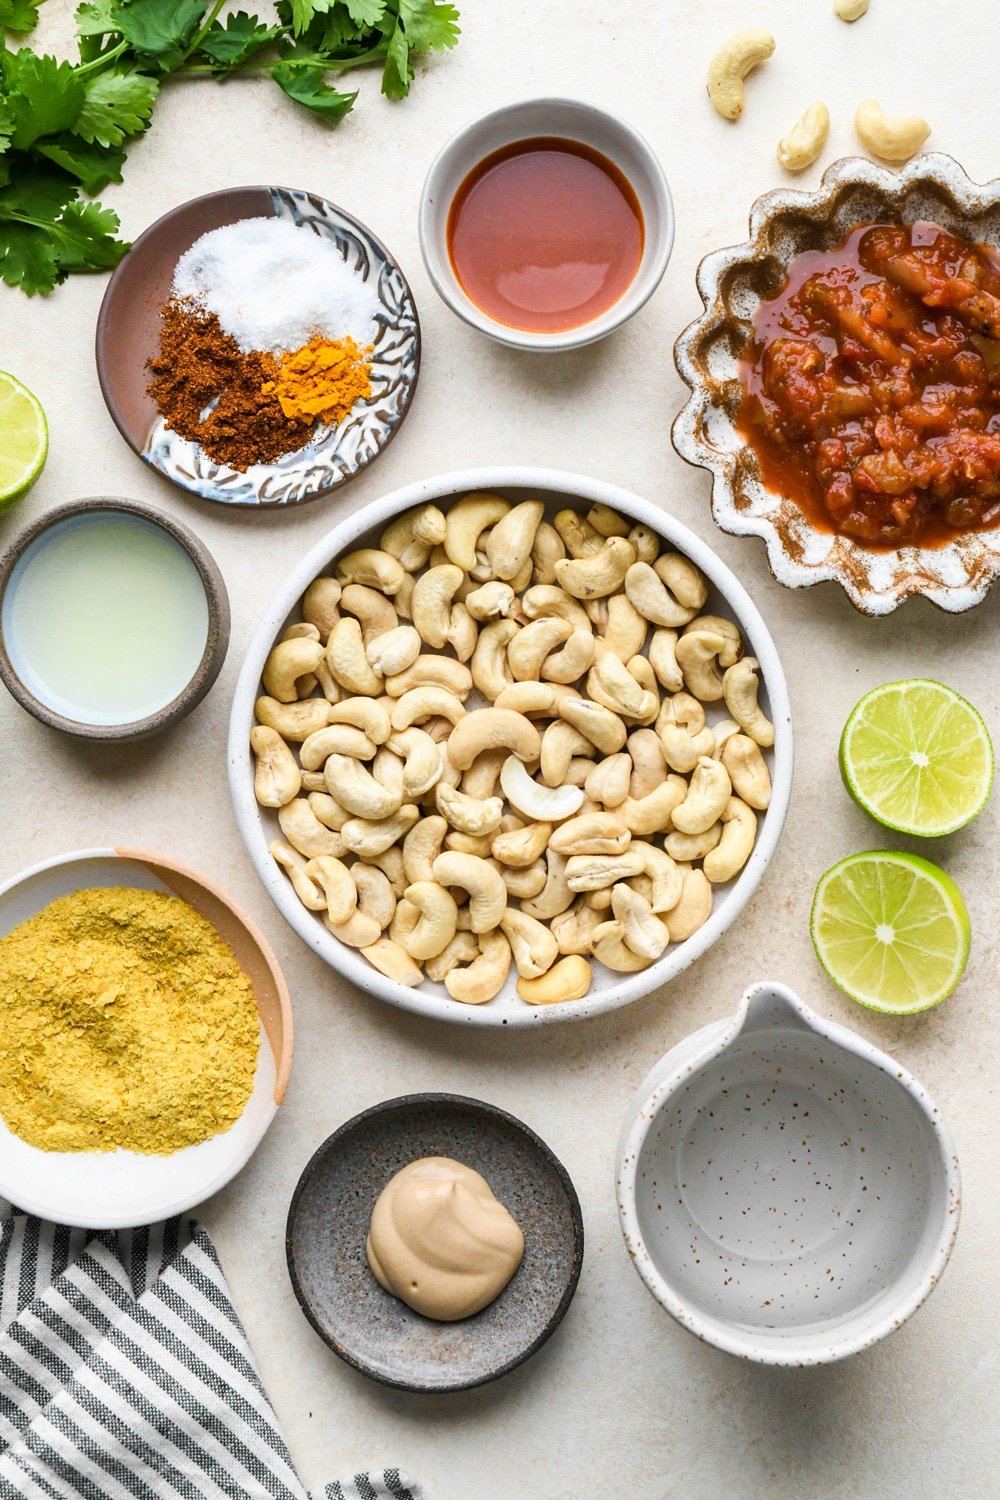 Ingredients for cashew queso in various ceramics on a light cream colored background.